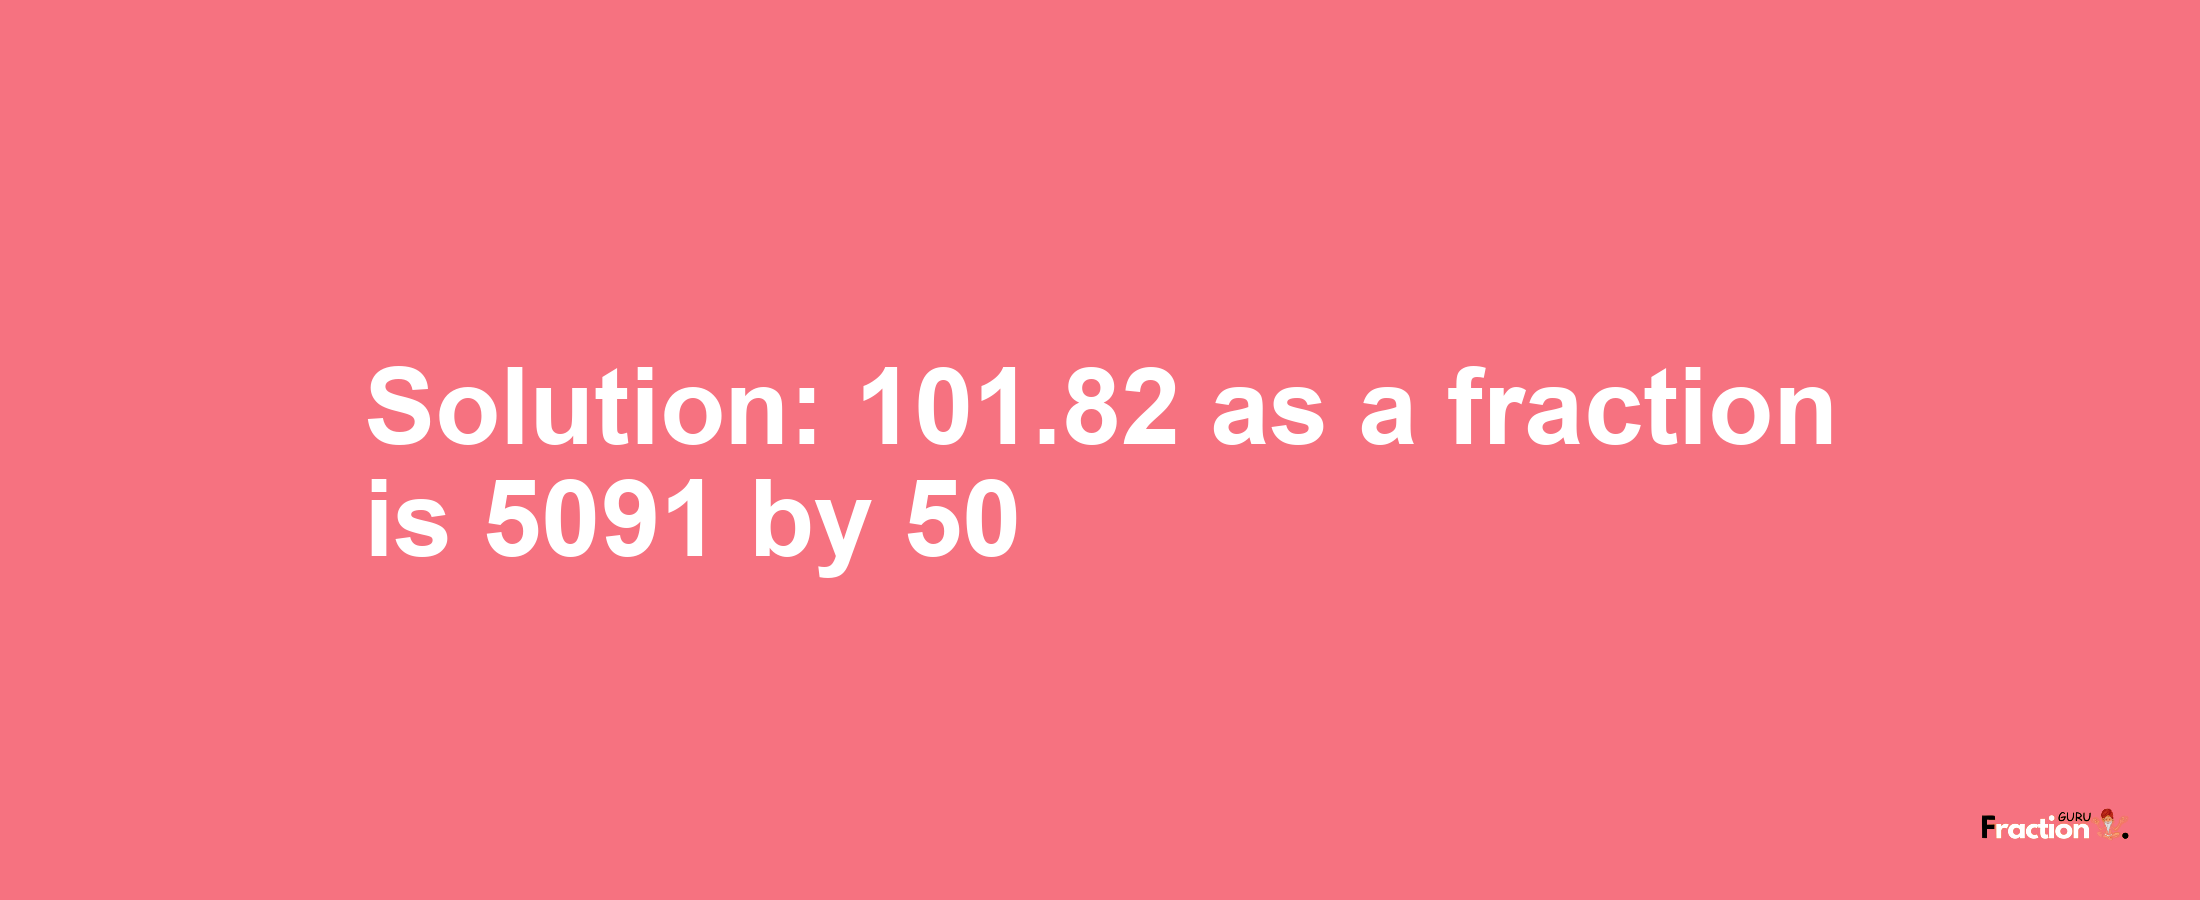 Solution:101.82 as a fraction is 5091/50